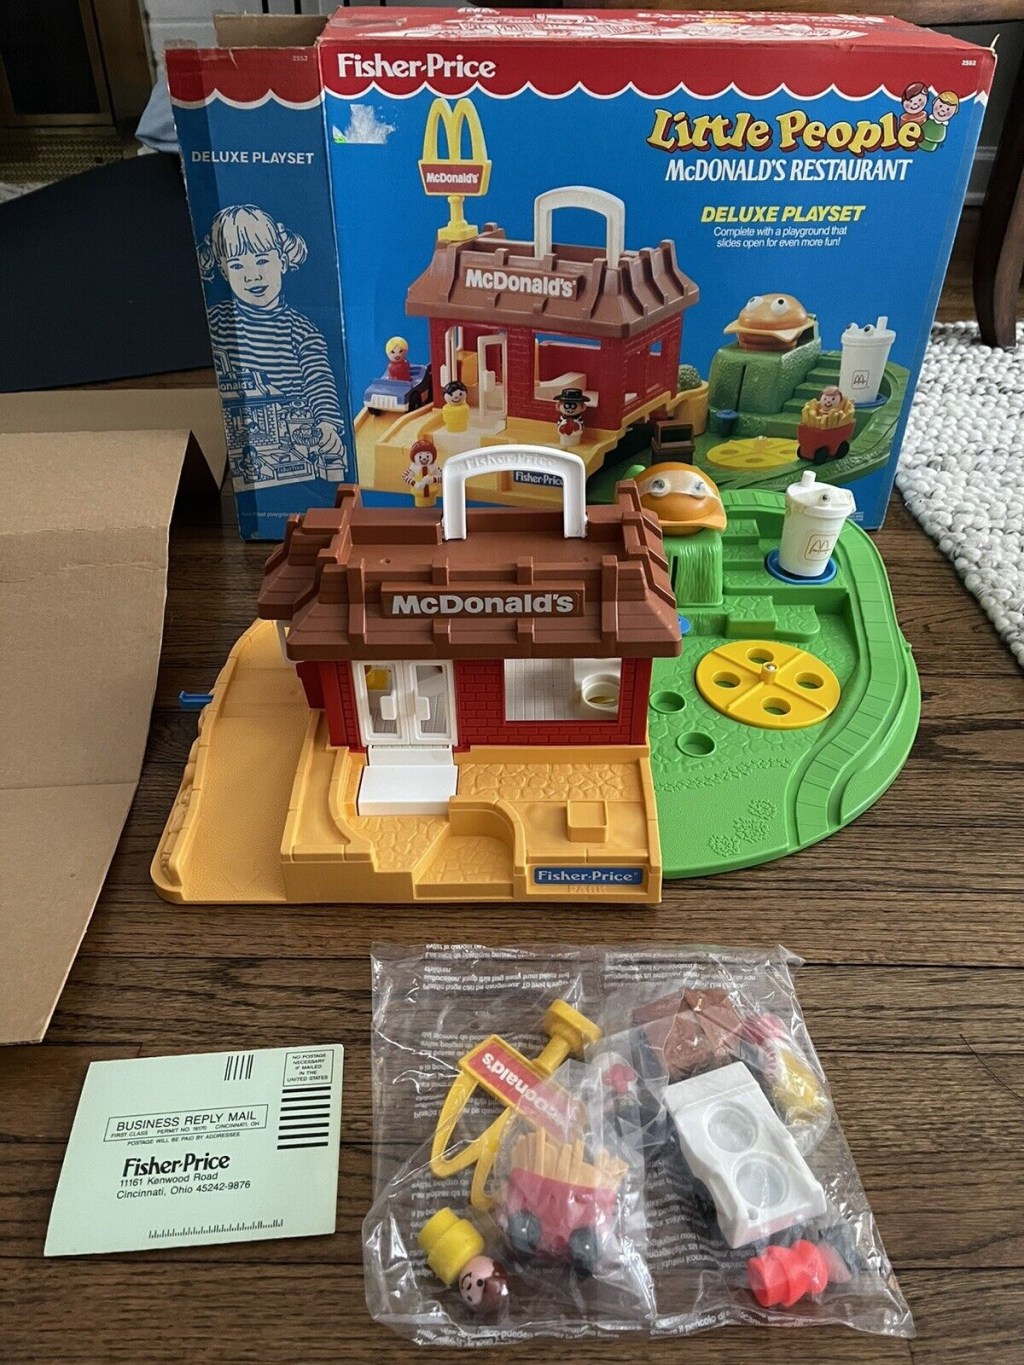 A vintage fisher price mcdonald's playset displayed on a table with its original box